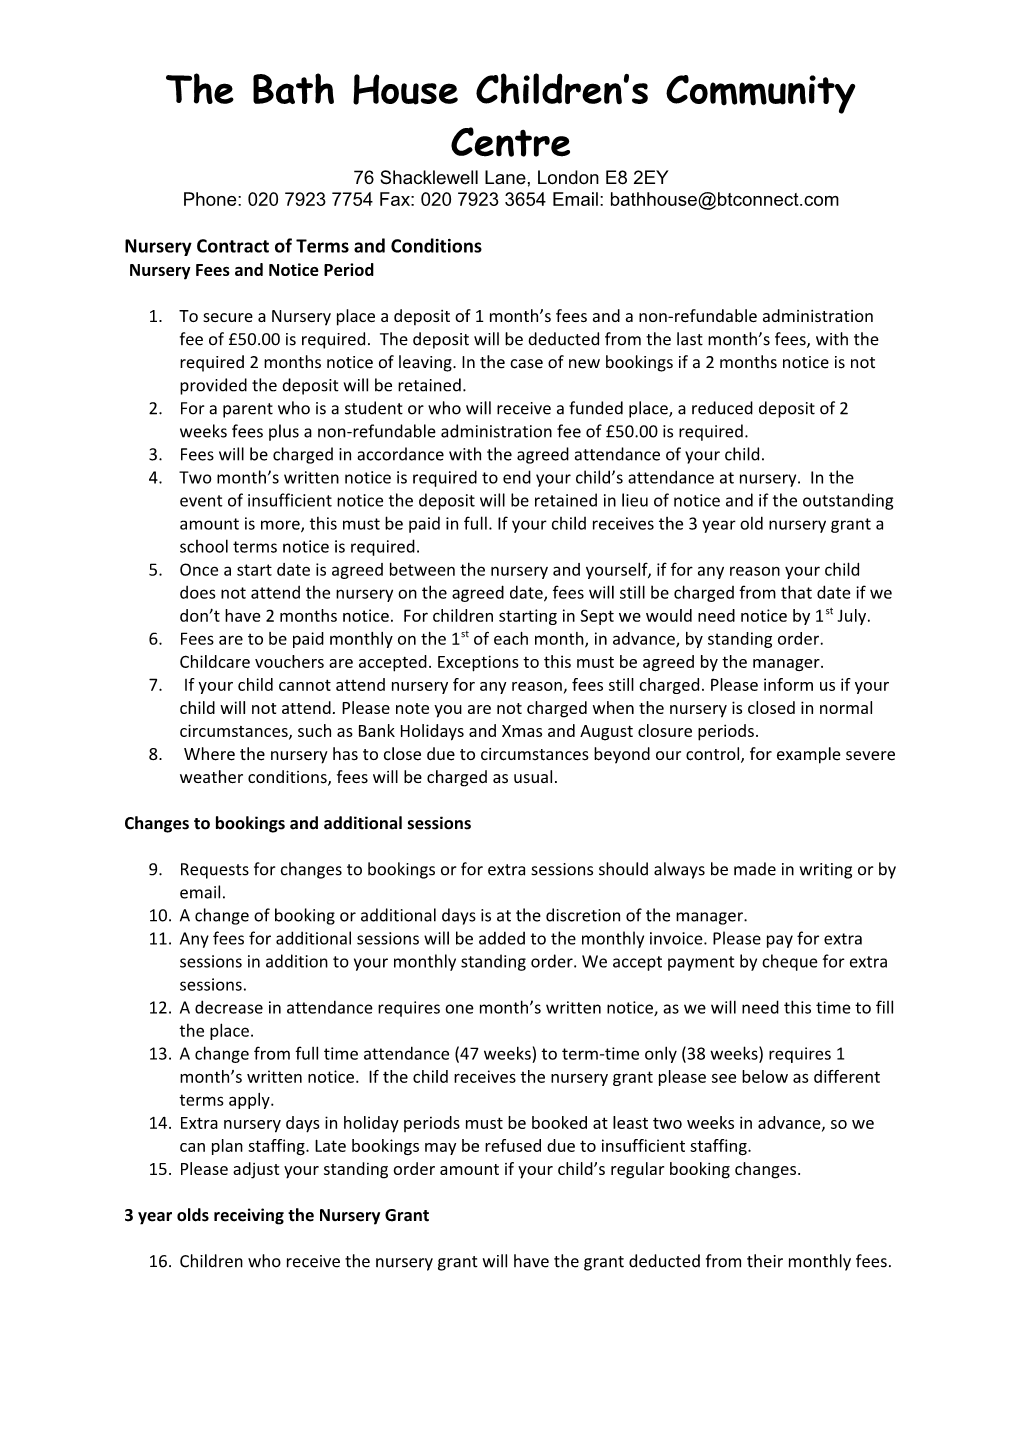 Nursery Contract of Terms and Conditions